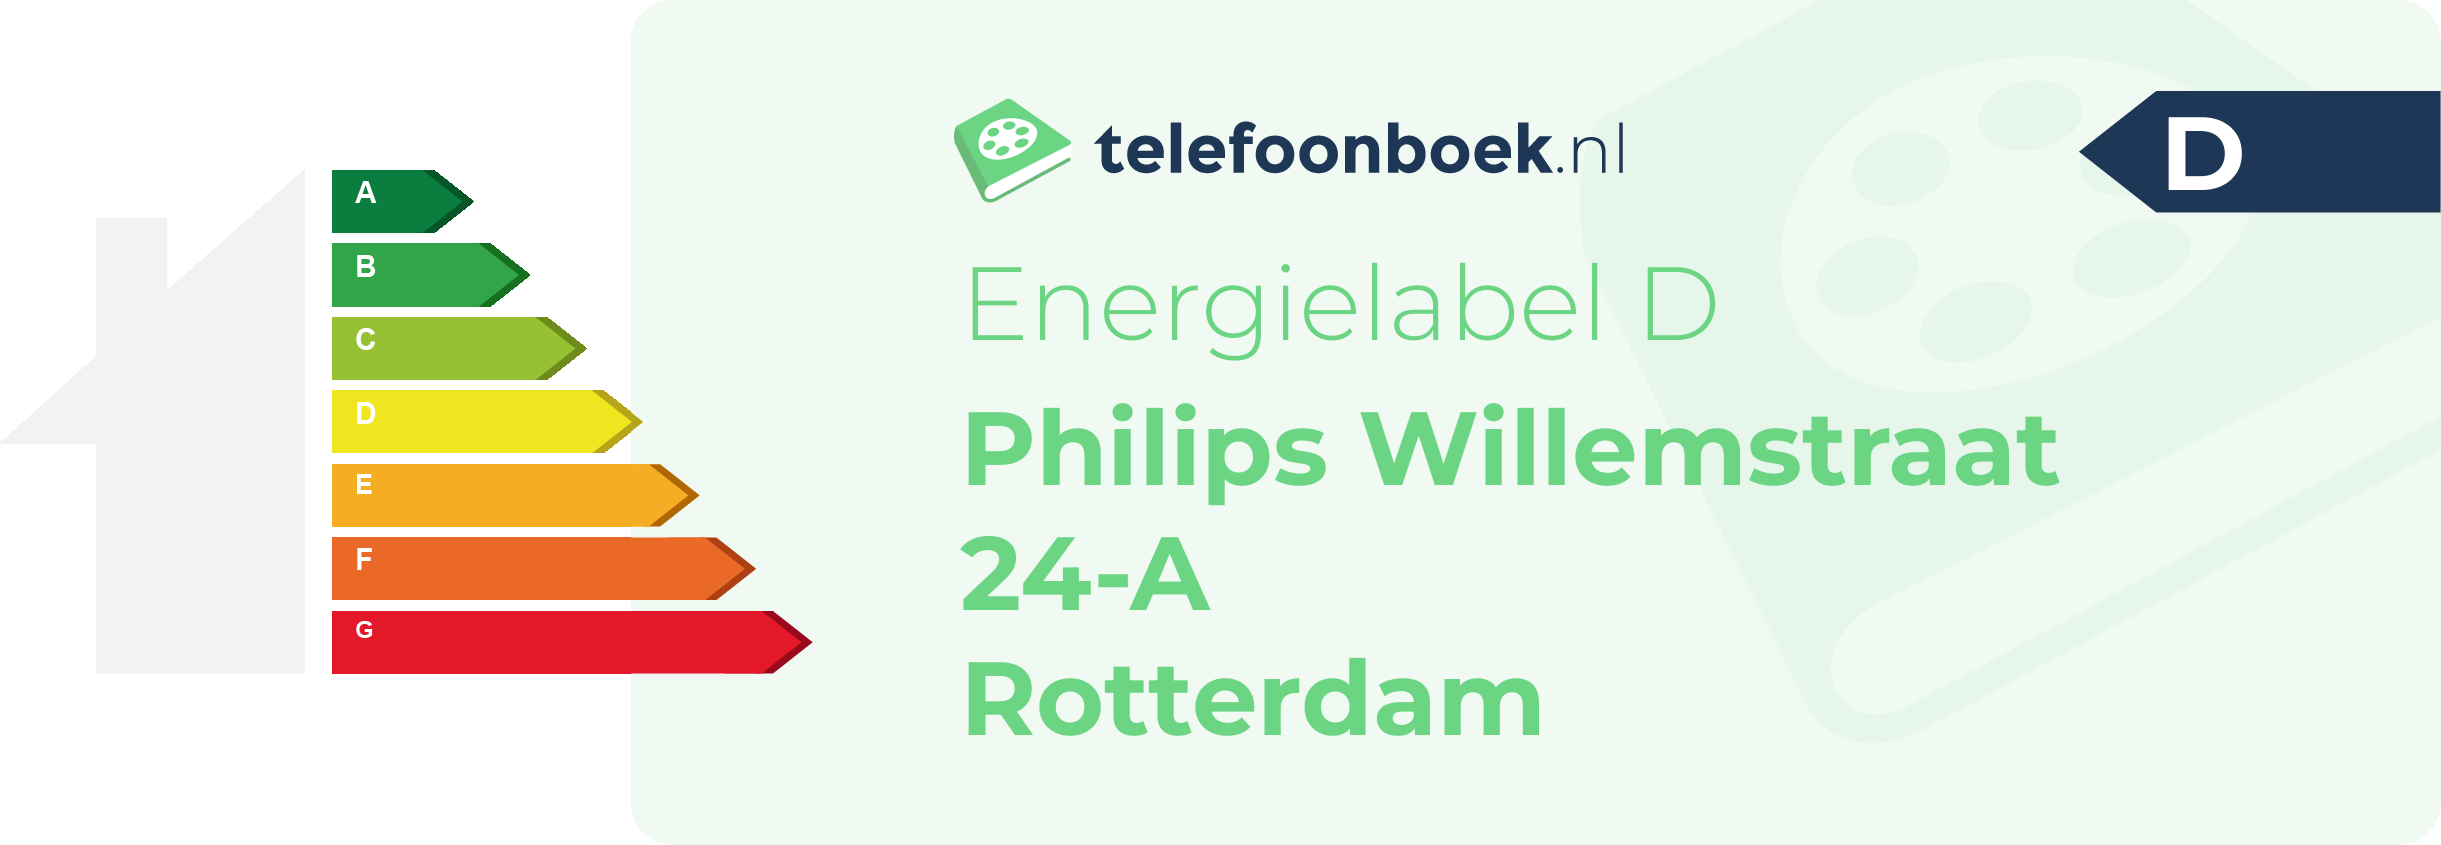 Energielabel Philips Willemstraat 24-A Rotterdam